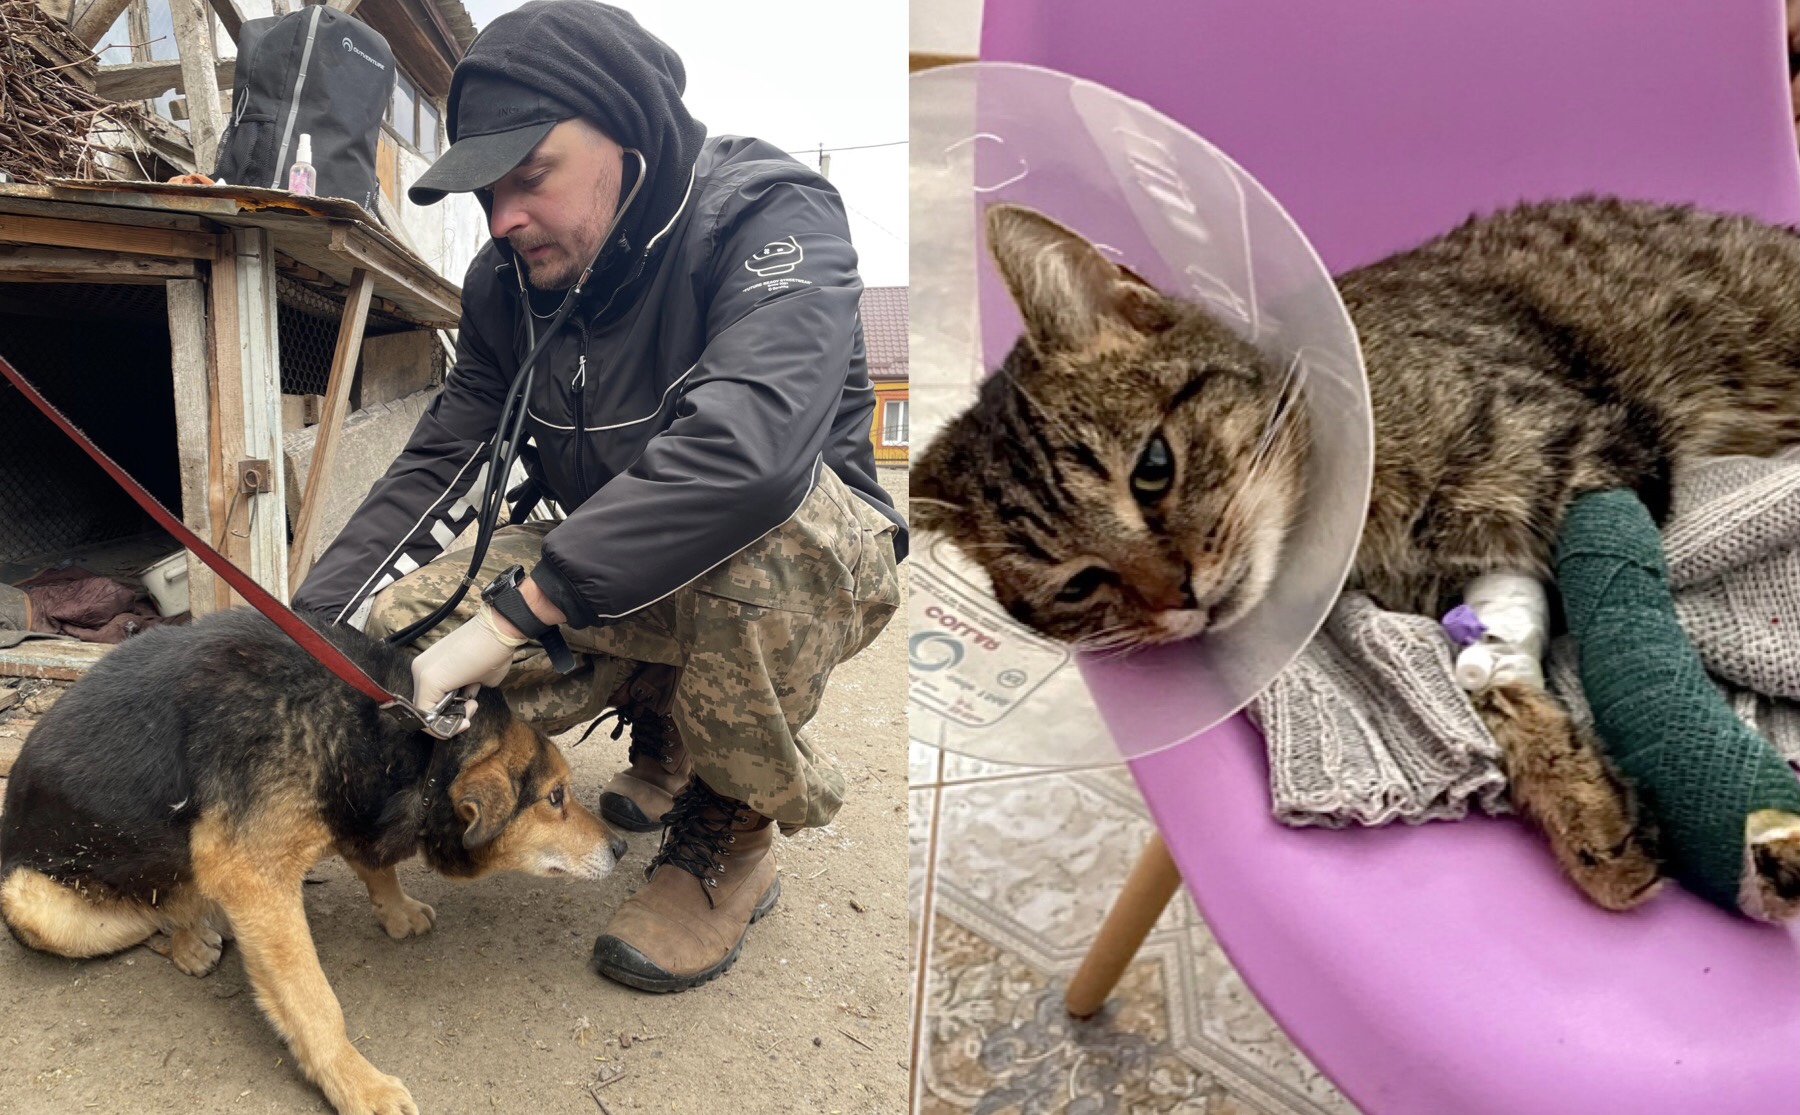 Hero Veterinarian Dr. Matviichuk Risks His Life To Care For Animal Victims  Of War-Torn Ukraine; Help 'In Defense Of Animals' Support His Courageous  Efforts - World Animal News